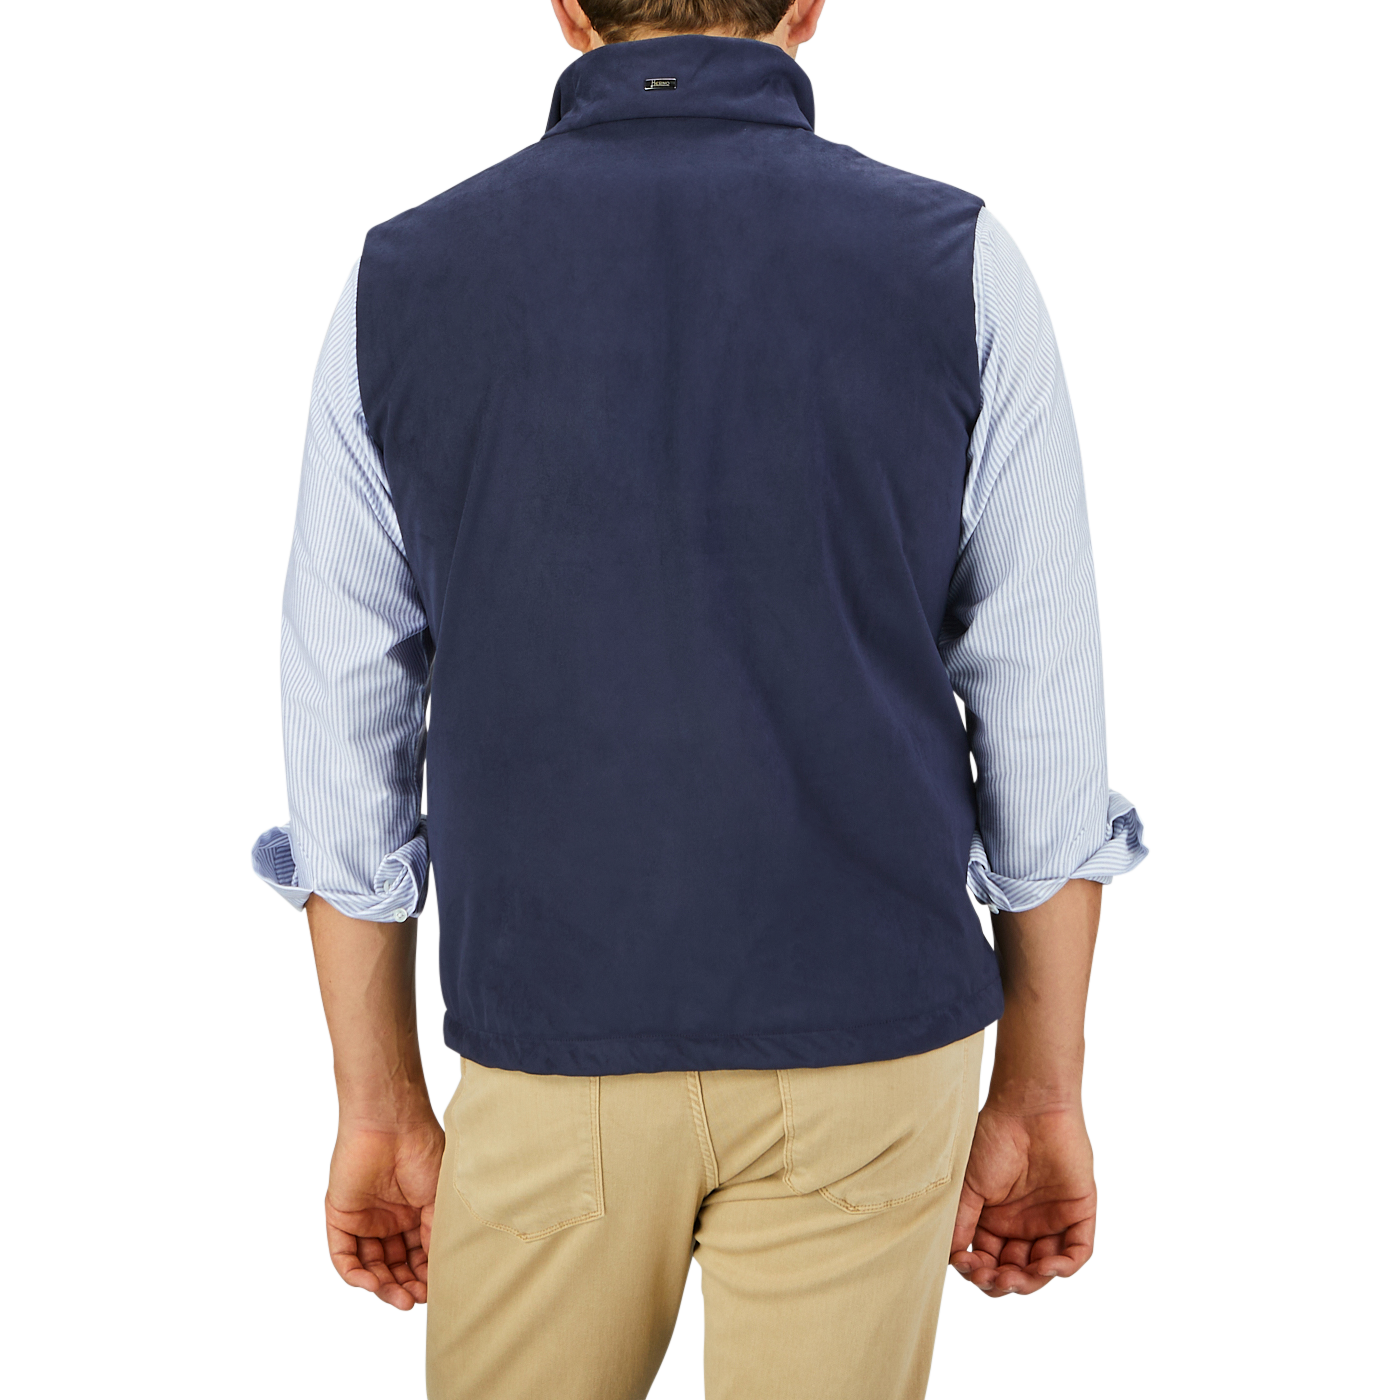 A man is shown from the back, wearing a Herno Navy Blue Suede Alcantara Zip Gilet over a light blue, rolled-up sleeve shirt and light khaki pants.